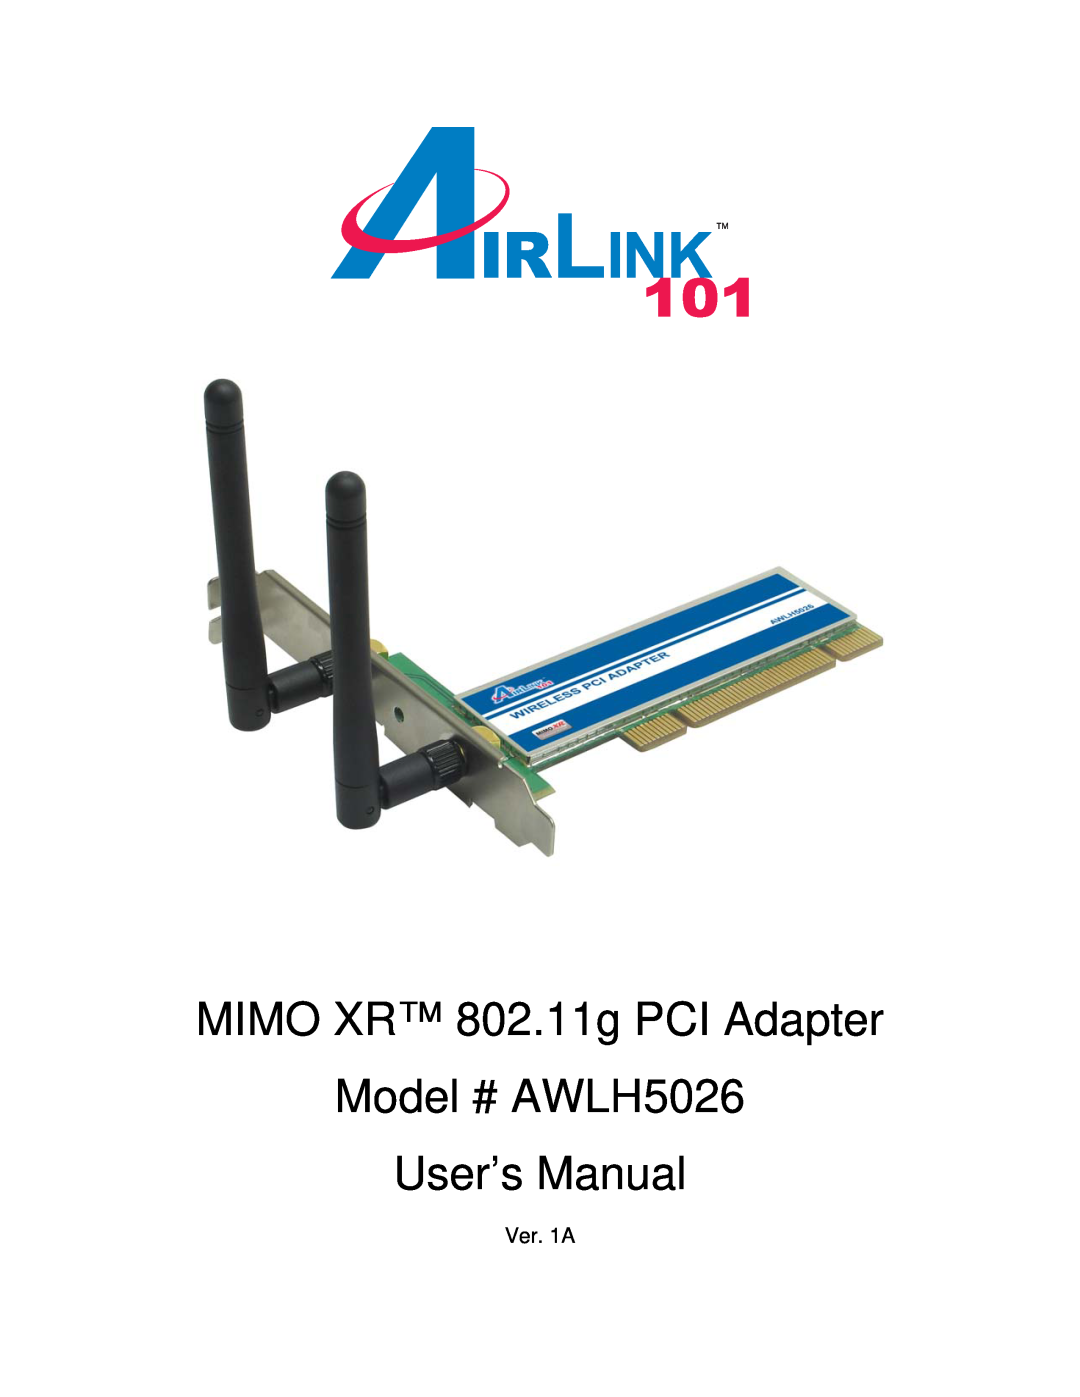 Airlink101 AWLH5026 user manual Section, Install Utility Software, Package Content, Quick Installation Guide 